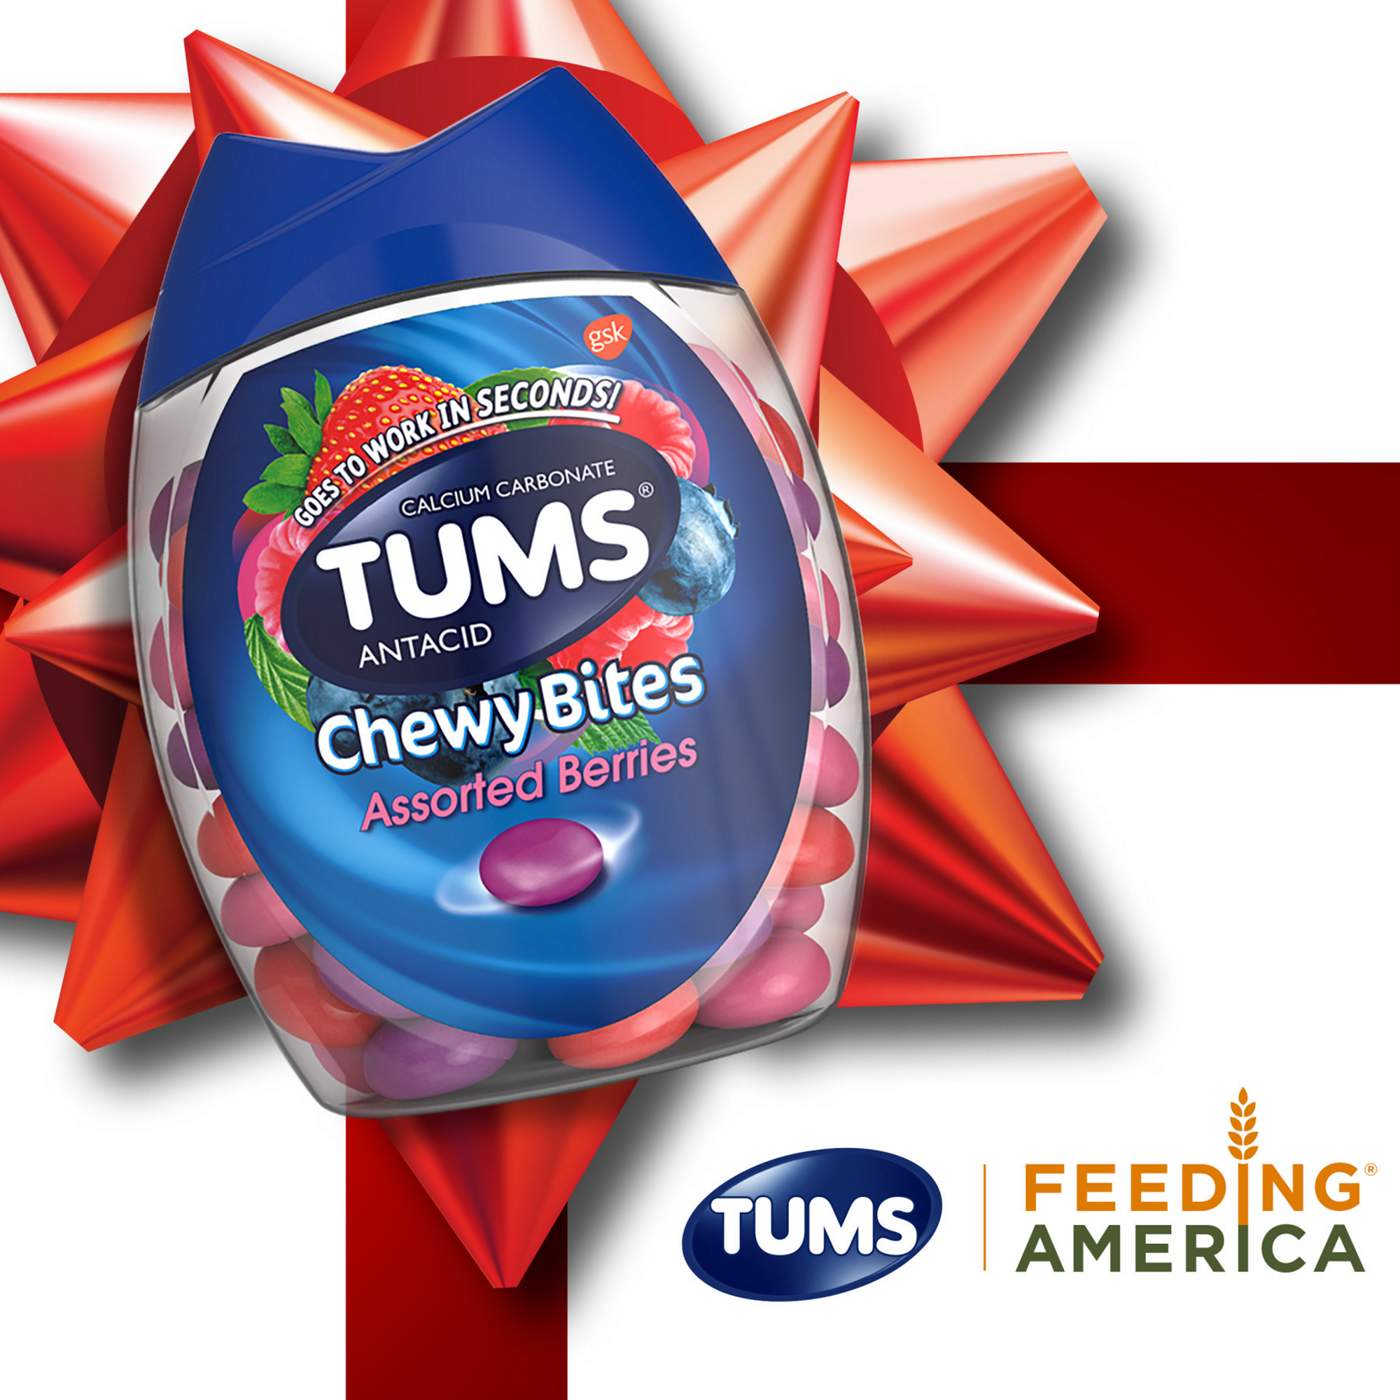 Tums Antacid Chewy Bites Tablets - Assorted Berries; image 4 of 8